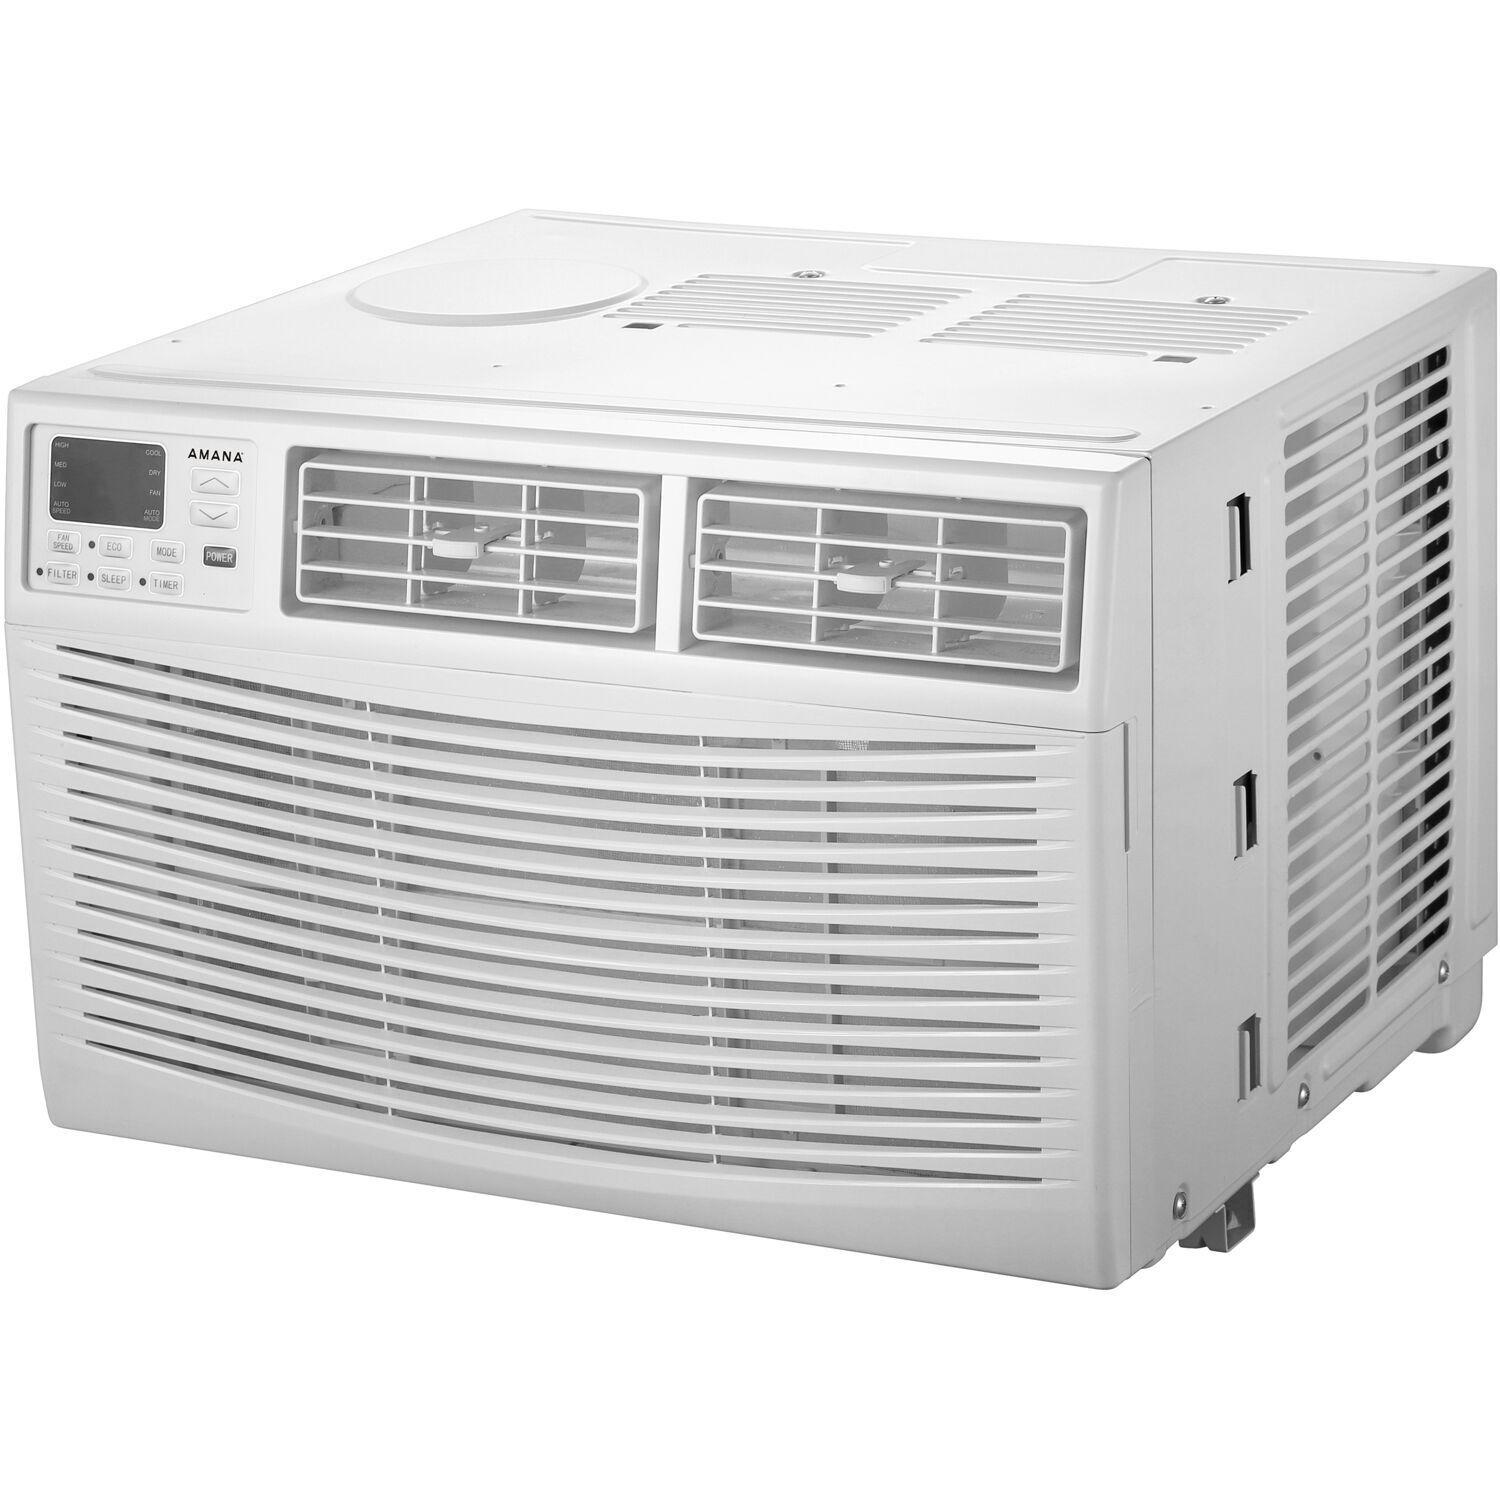 10,000 BTU 115V Window-Mounted Air Conditioner with Remote Control